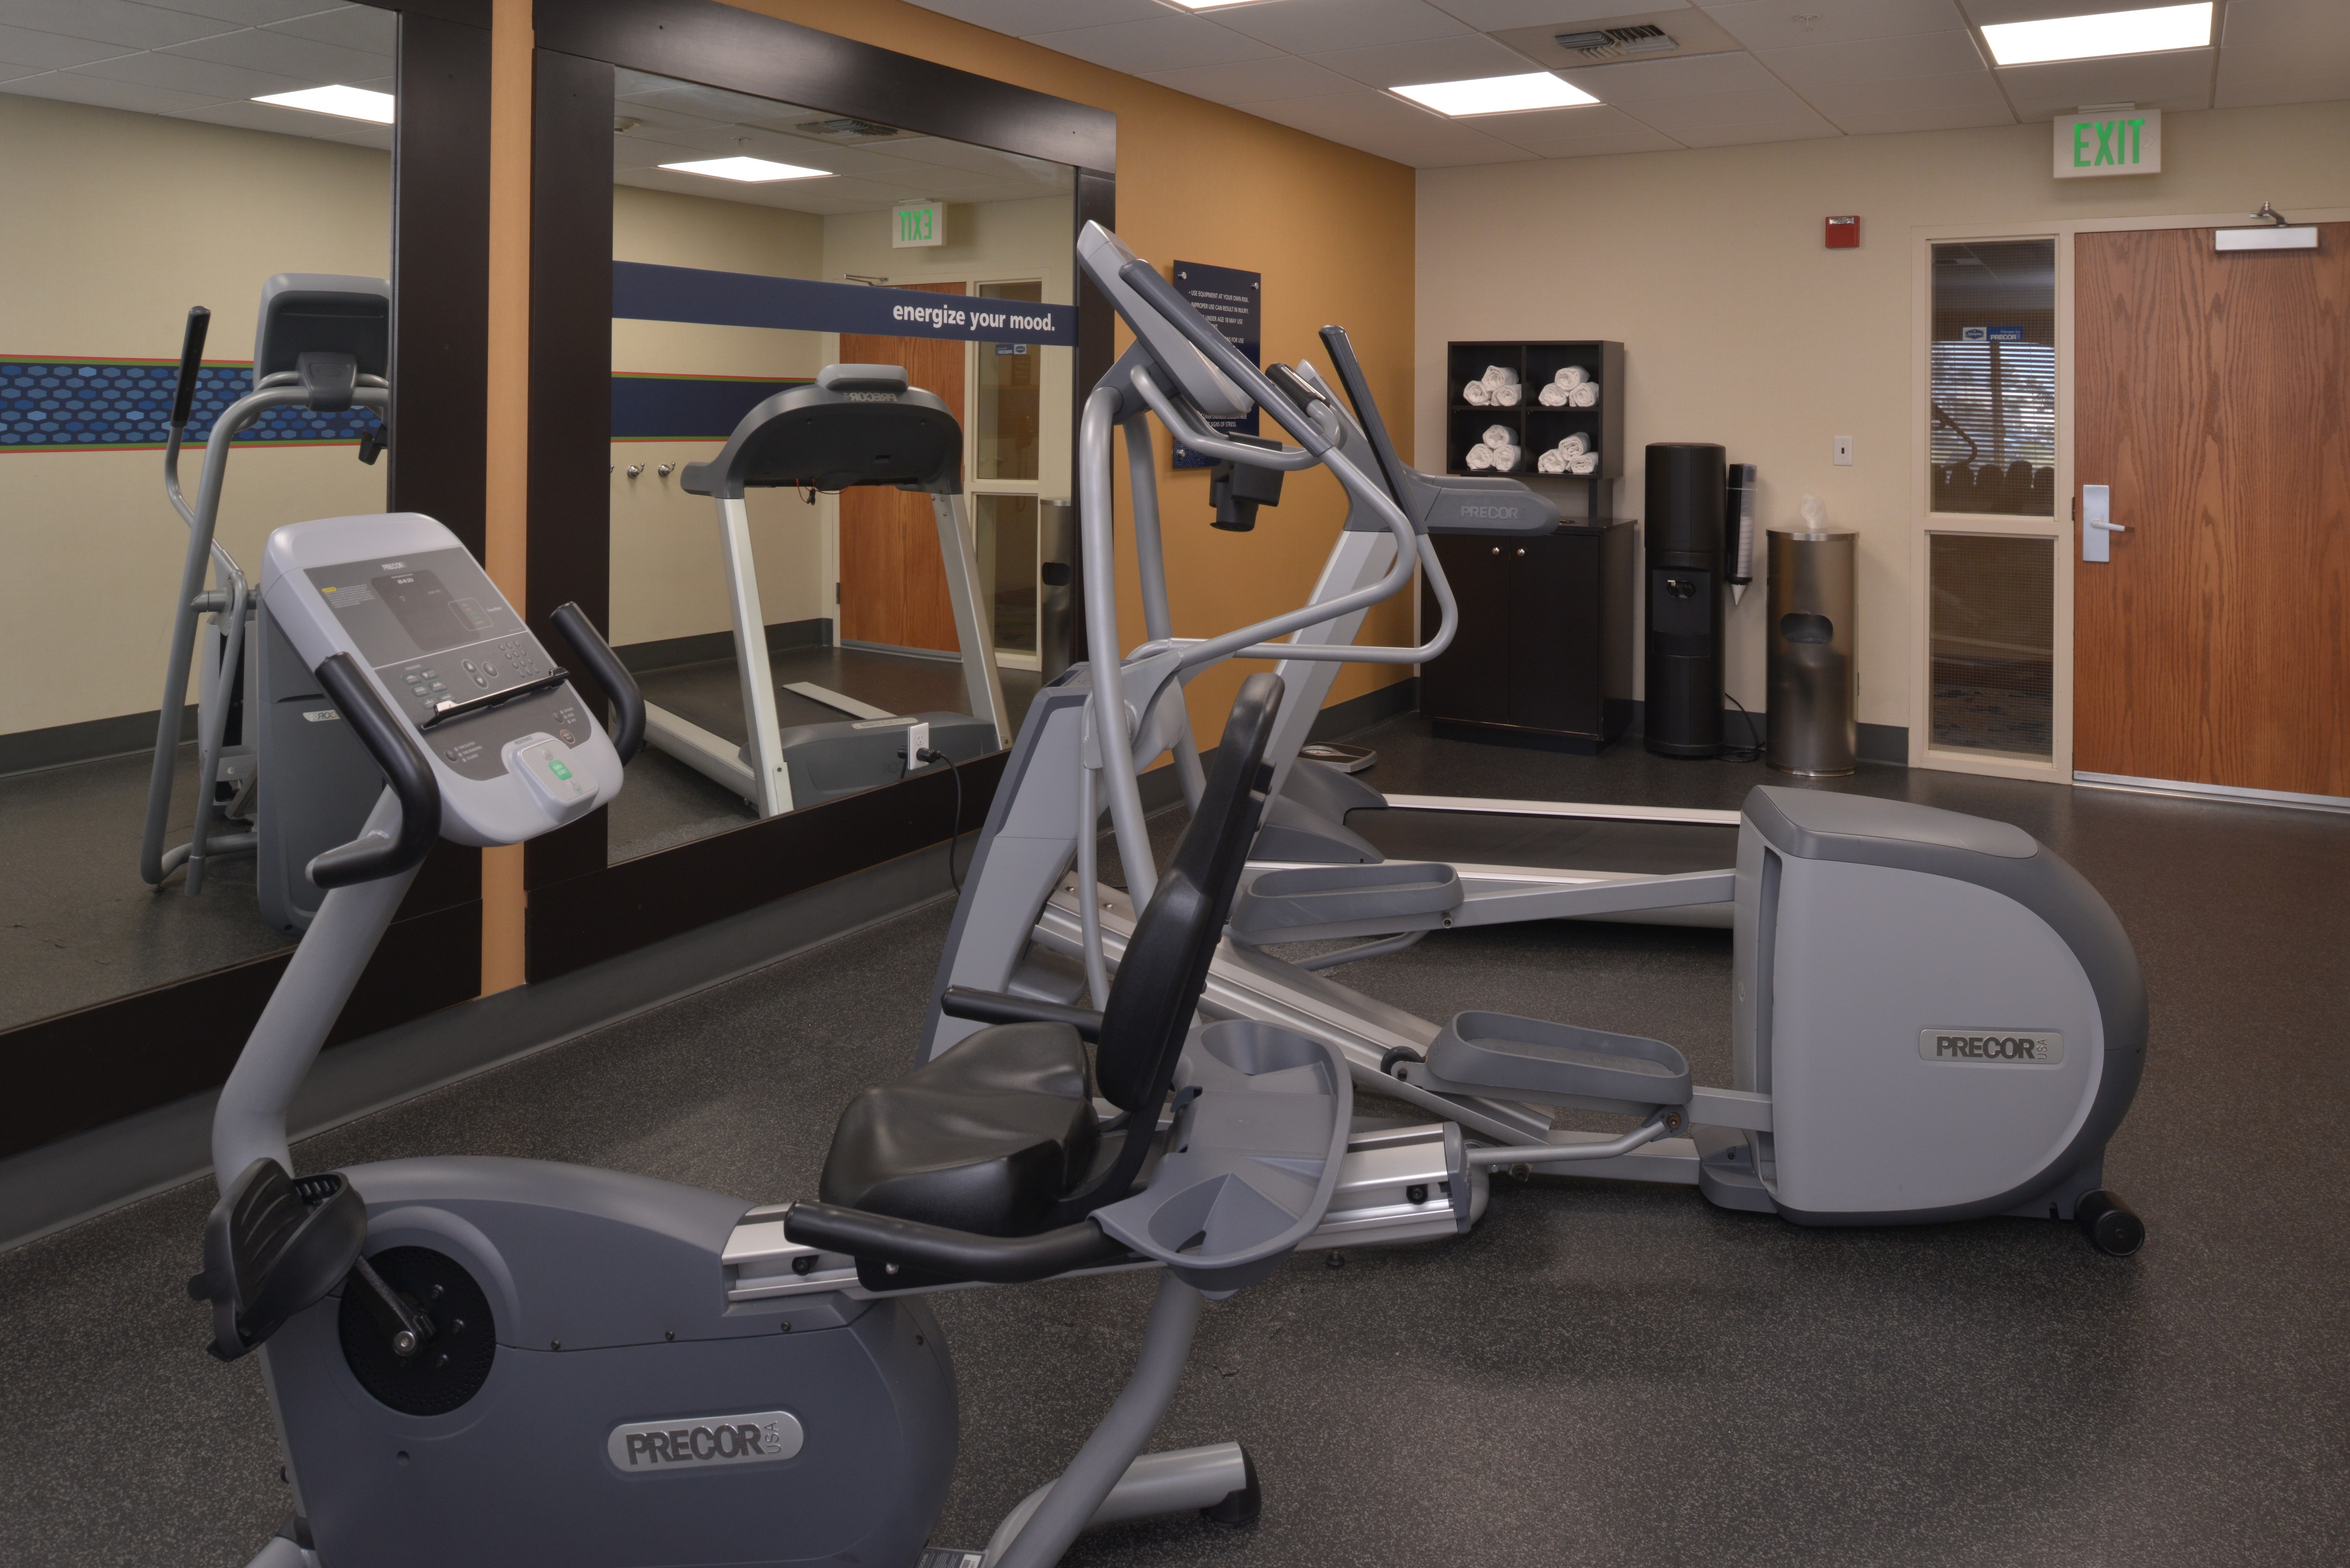 Fitness Room with Treadmill and Recumbent Bike